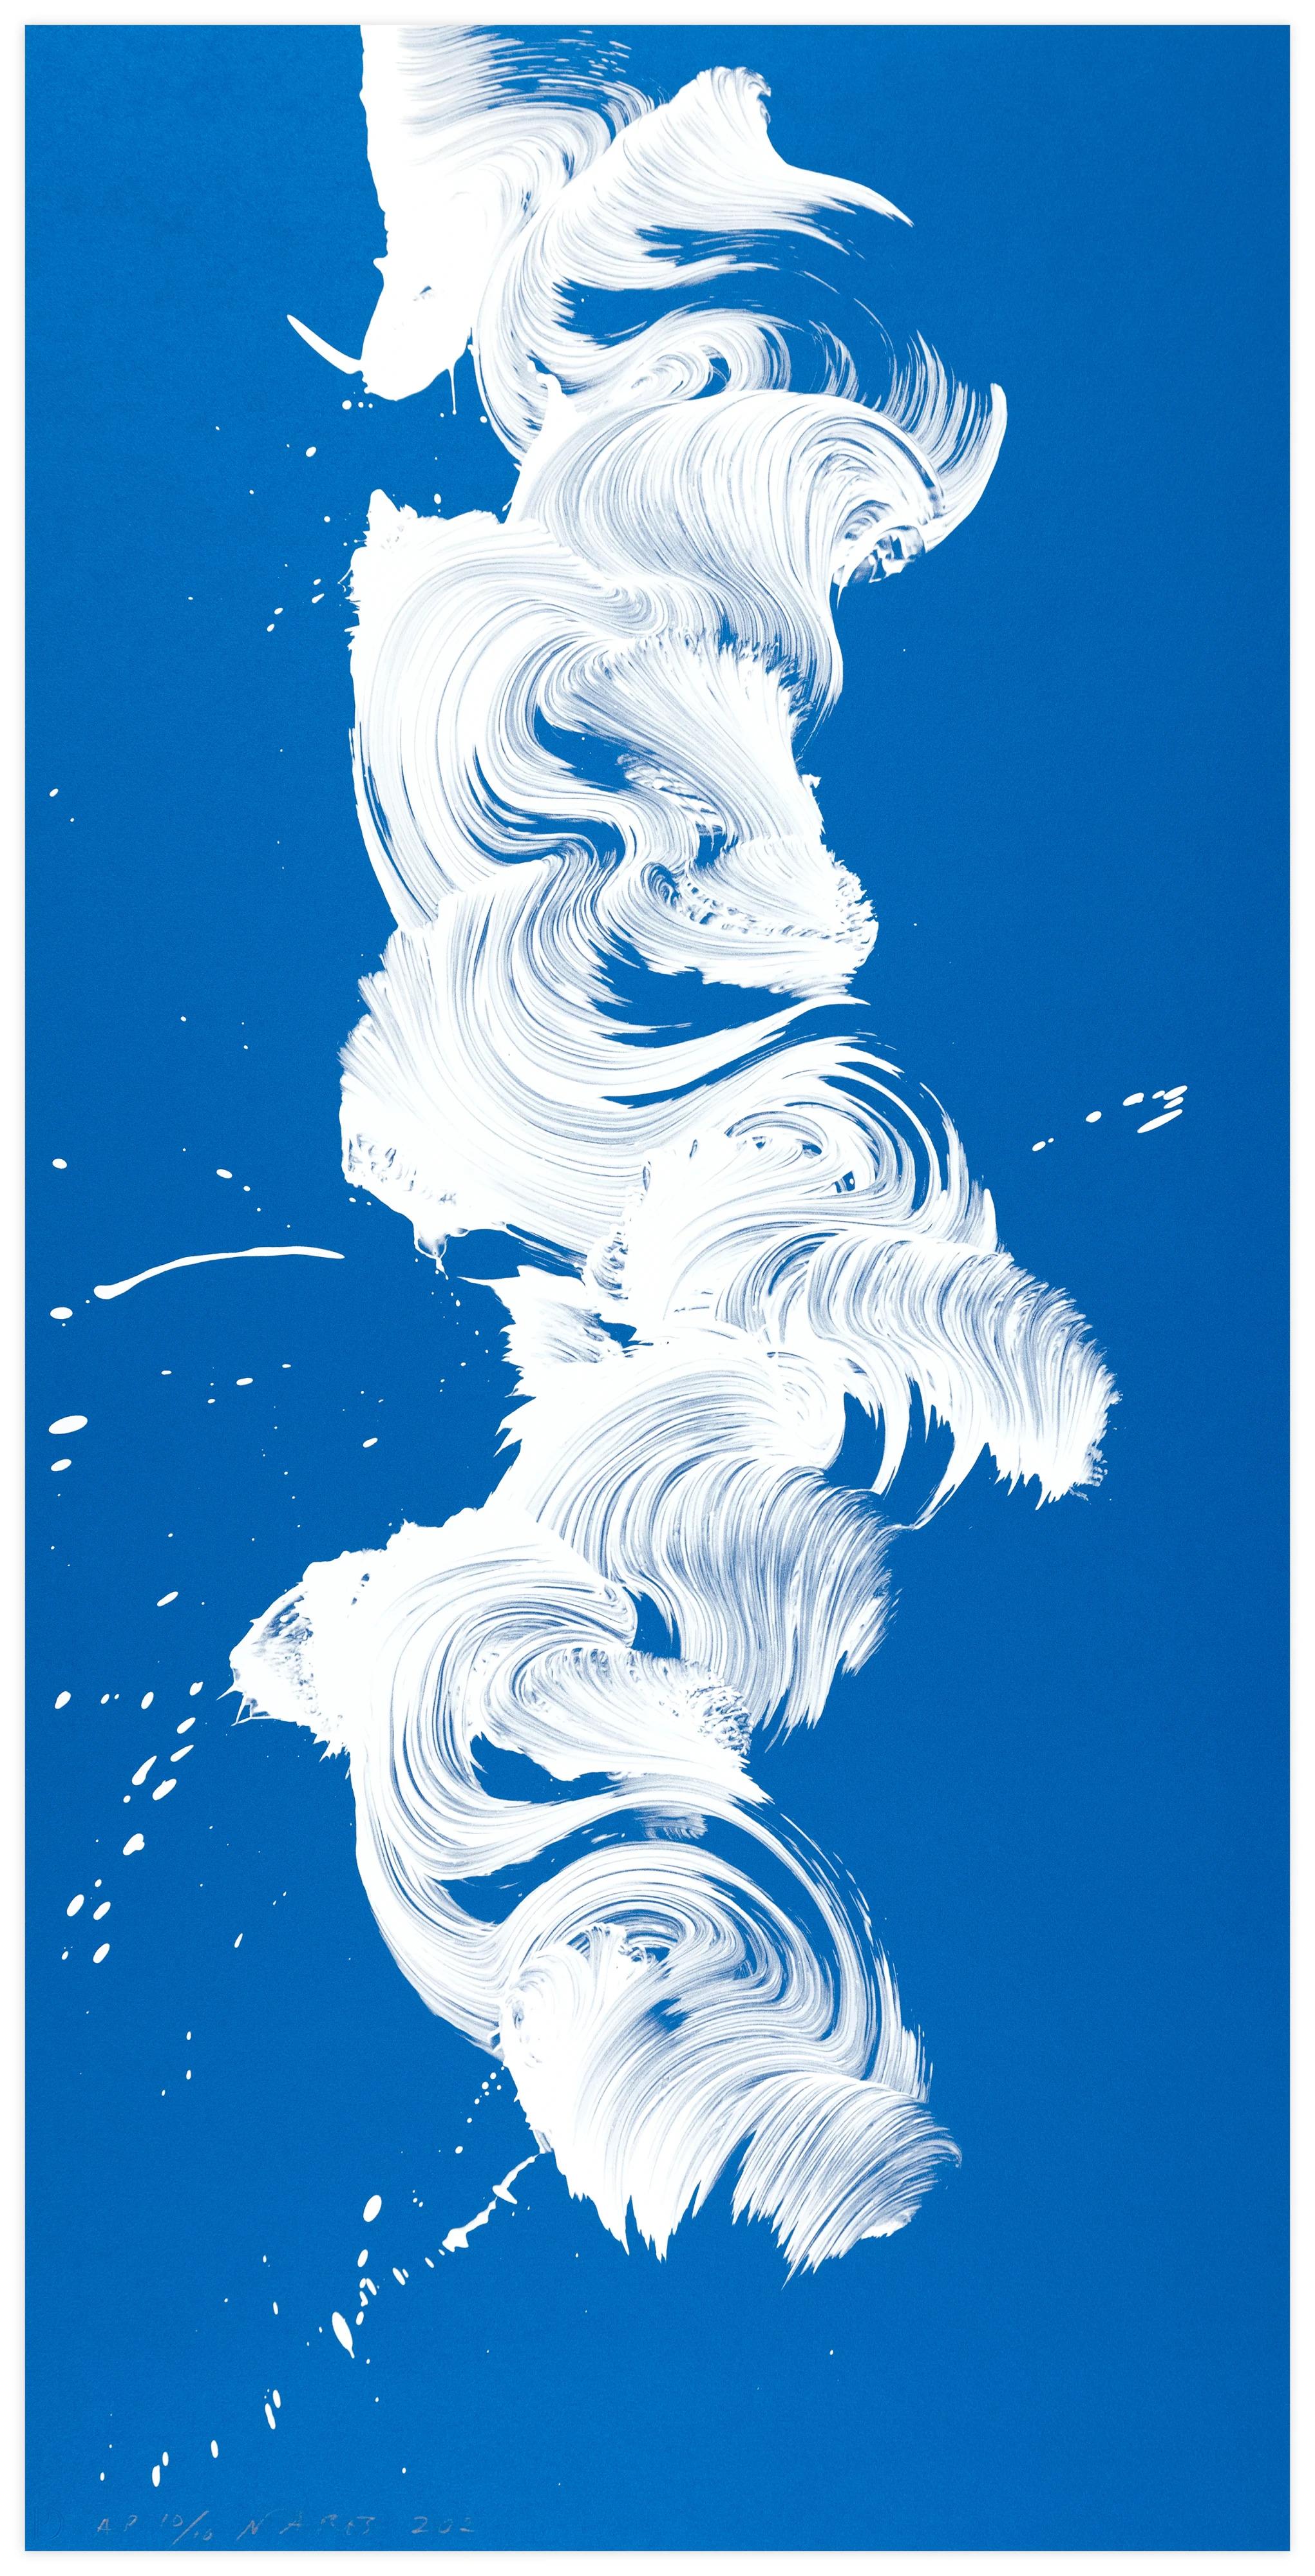 James Nares Abstract Print - Particle and Wave 1